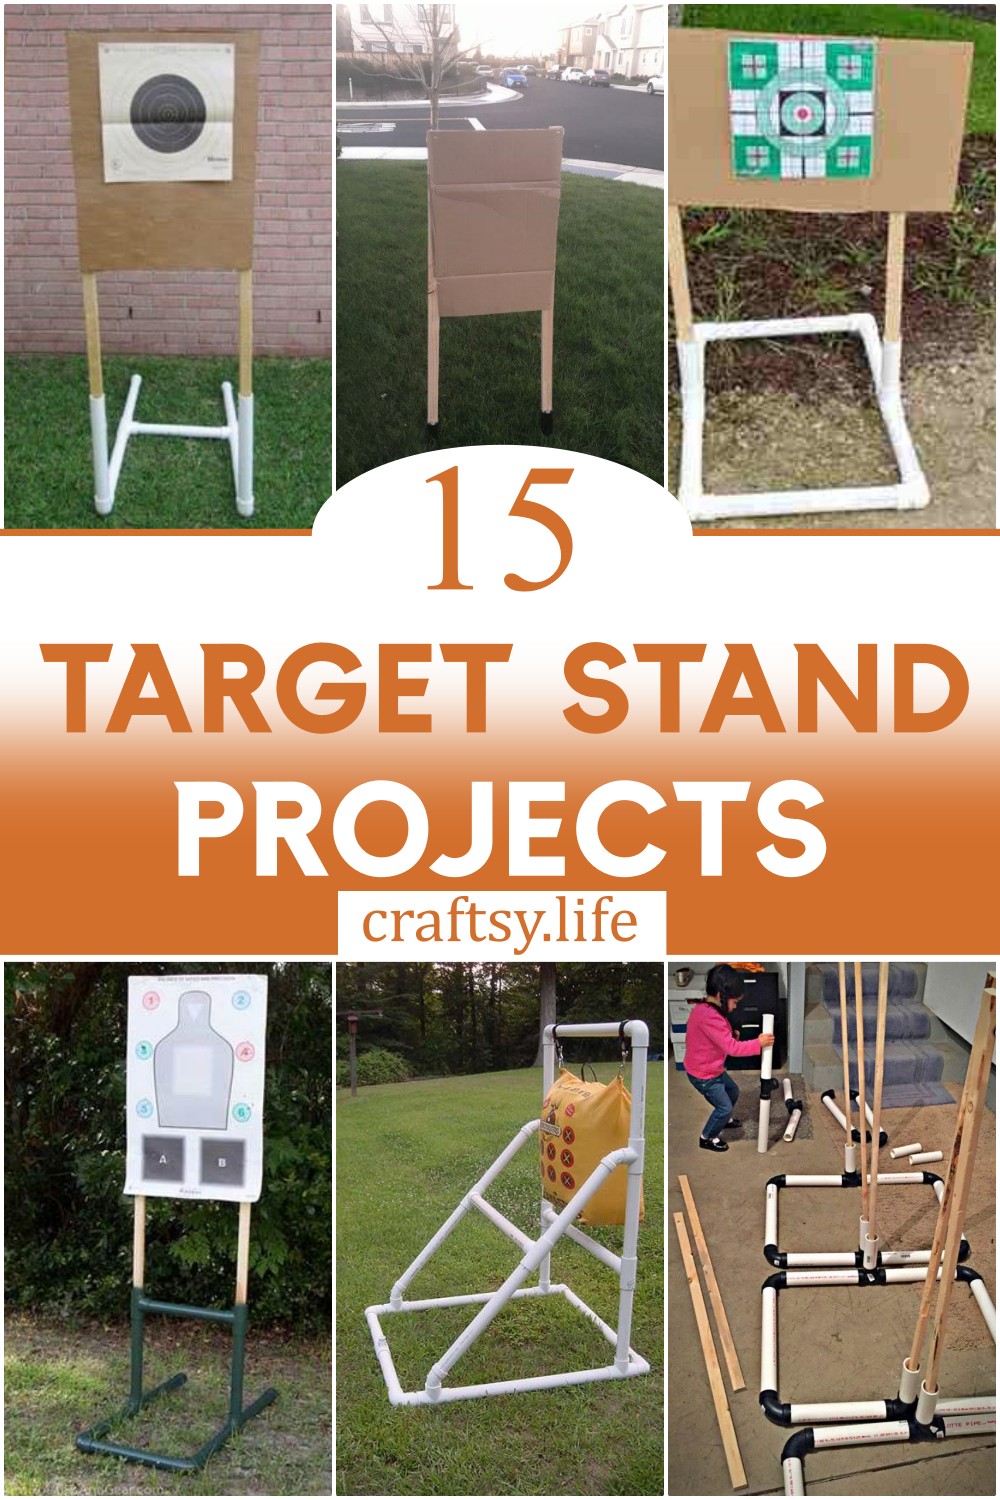 DIY Target Stand Projects 1